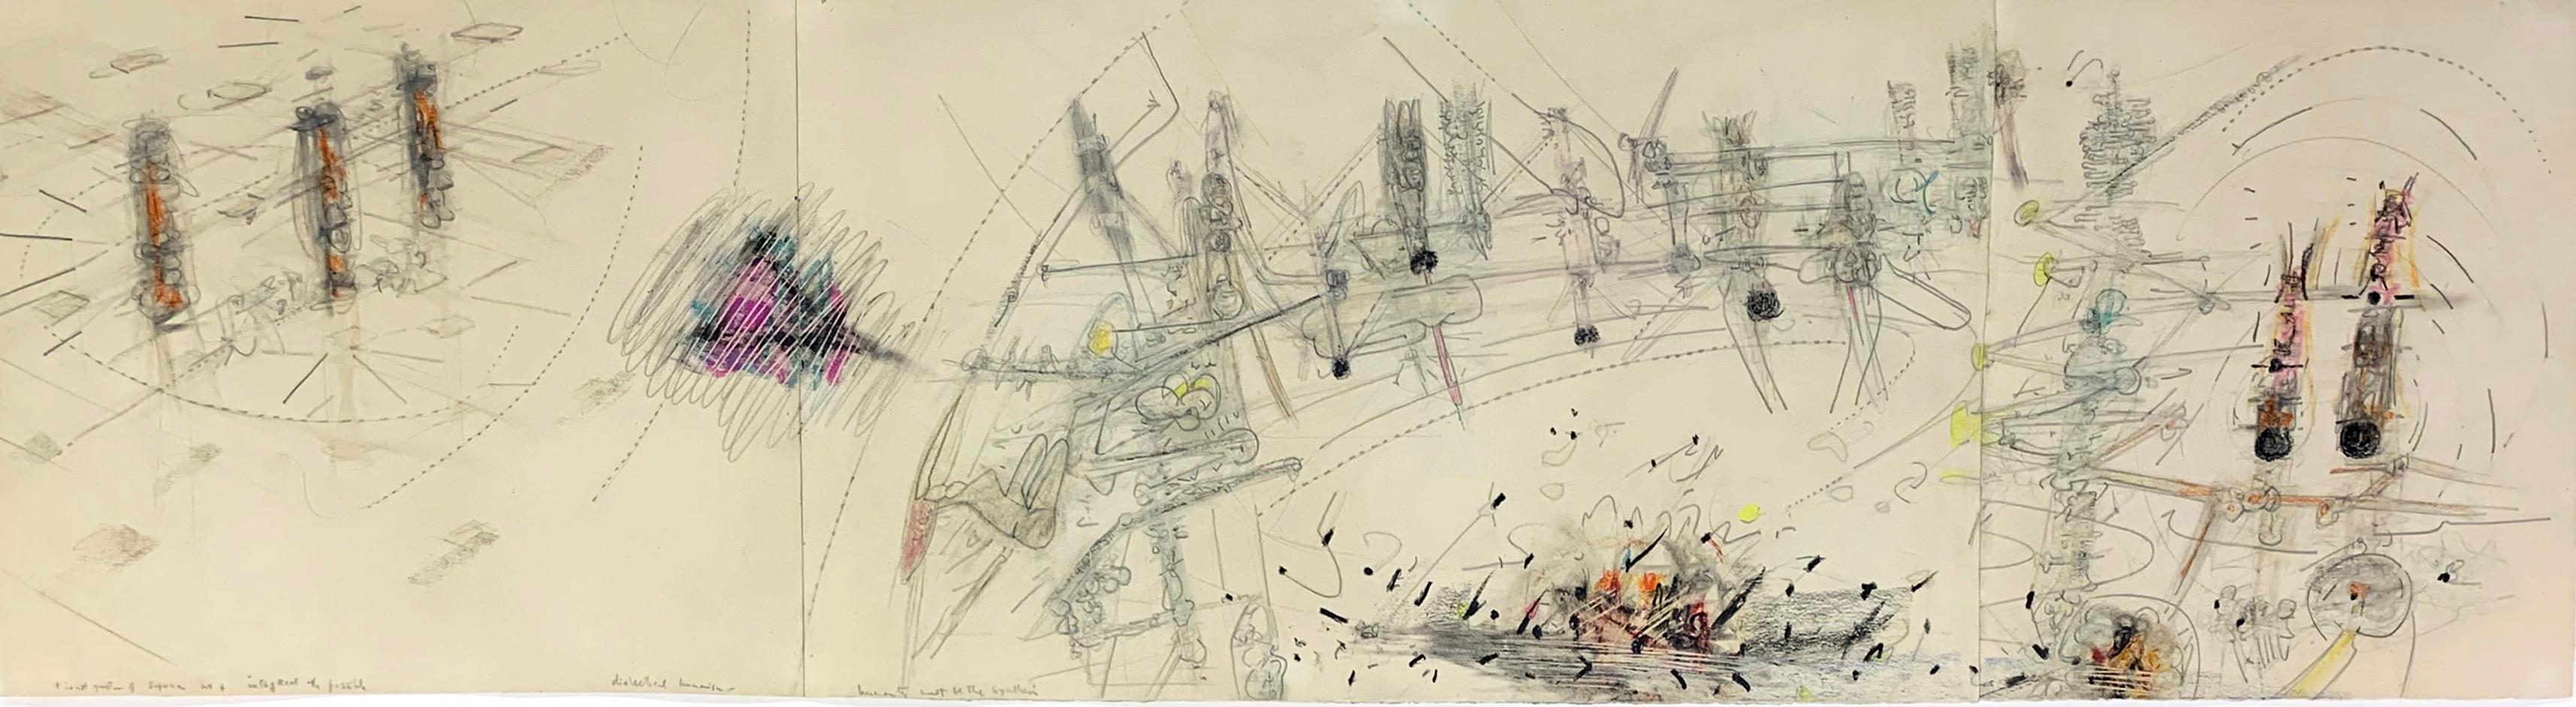 It's Not A Question of Superman - Abstract Art by Roberto Matta